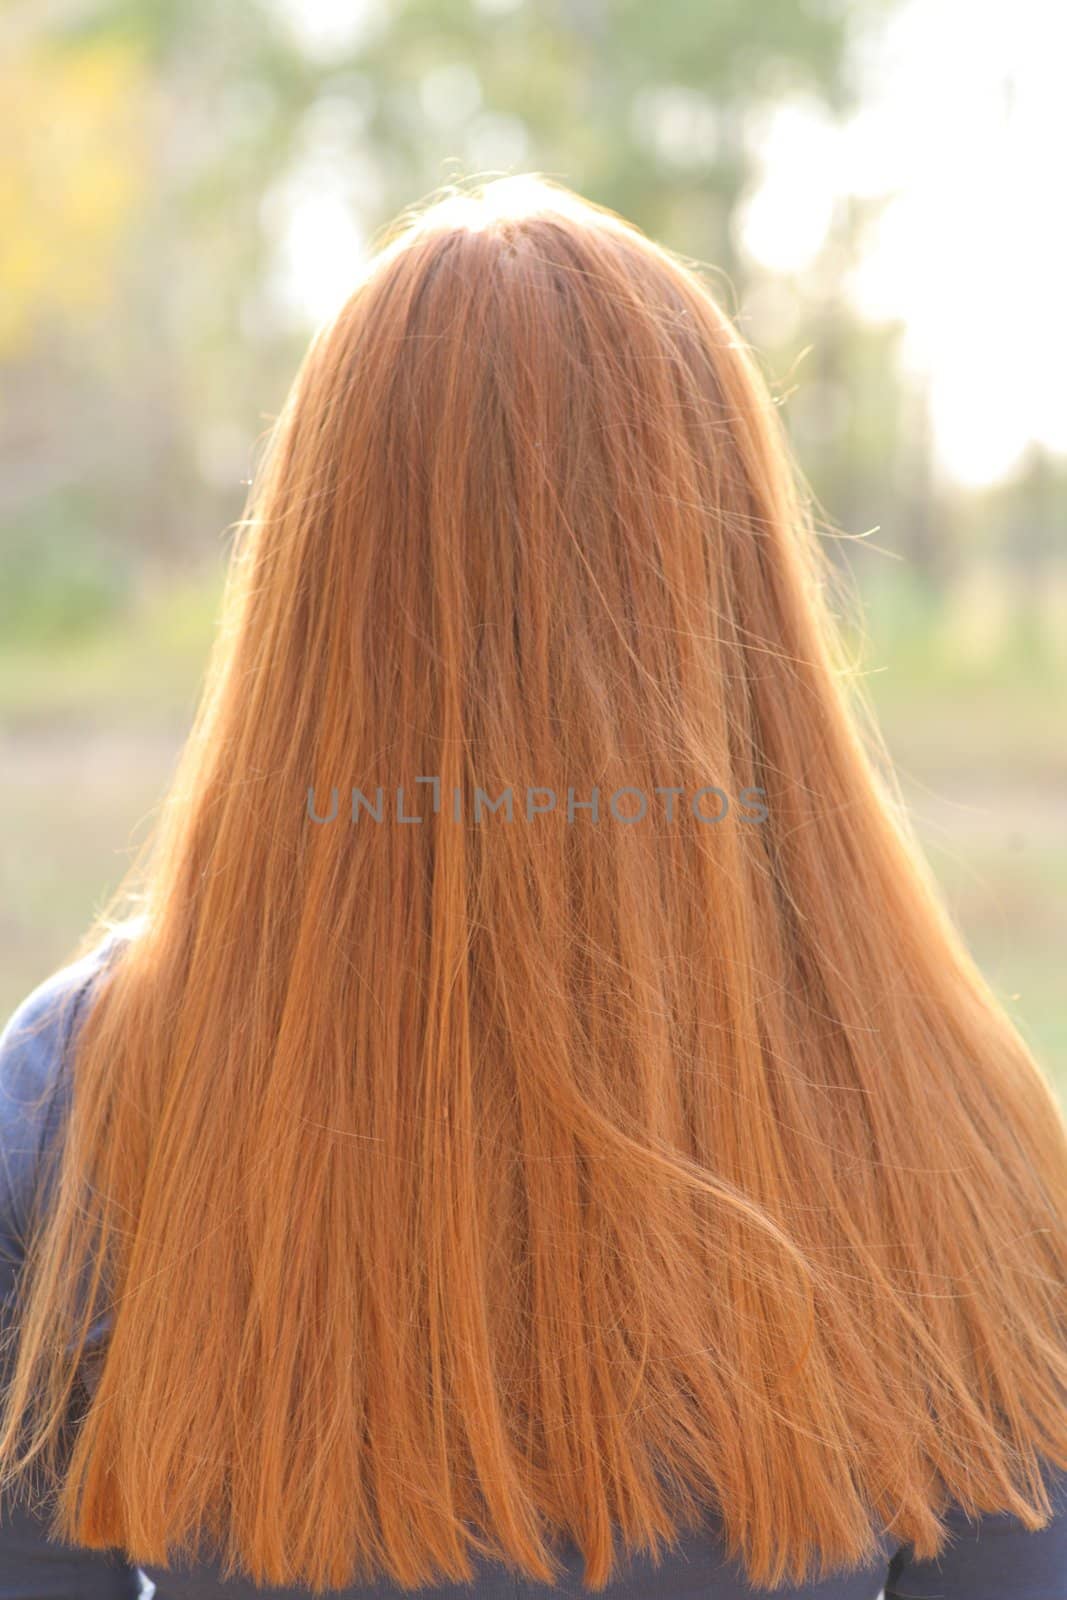 Gorgeous redhead girls hair from back. Outdoors